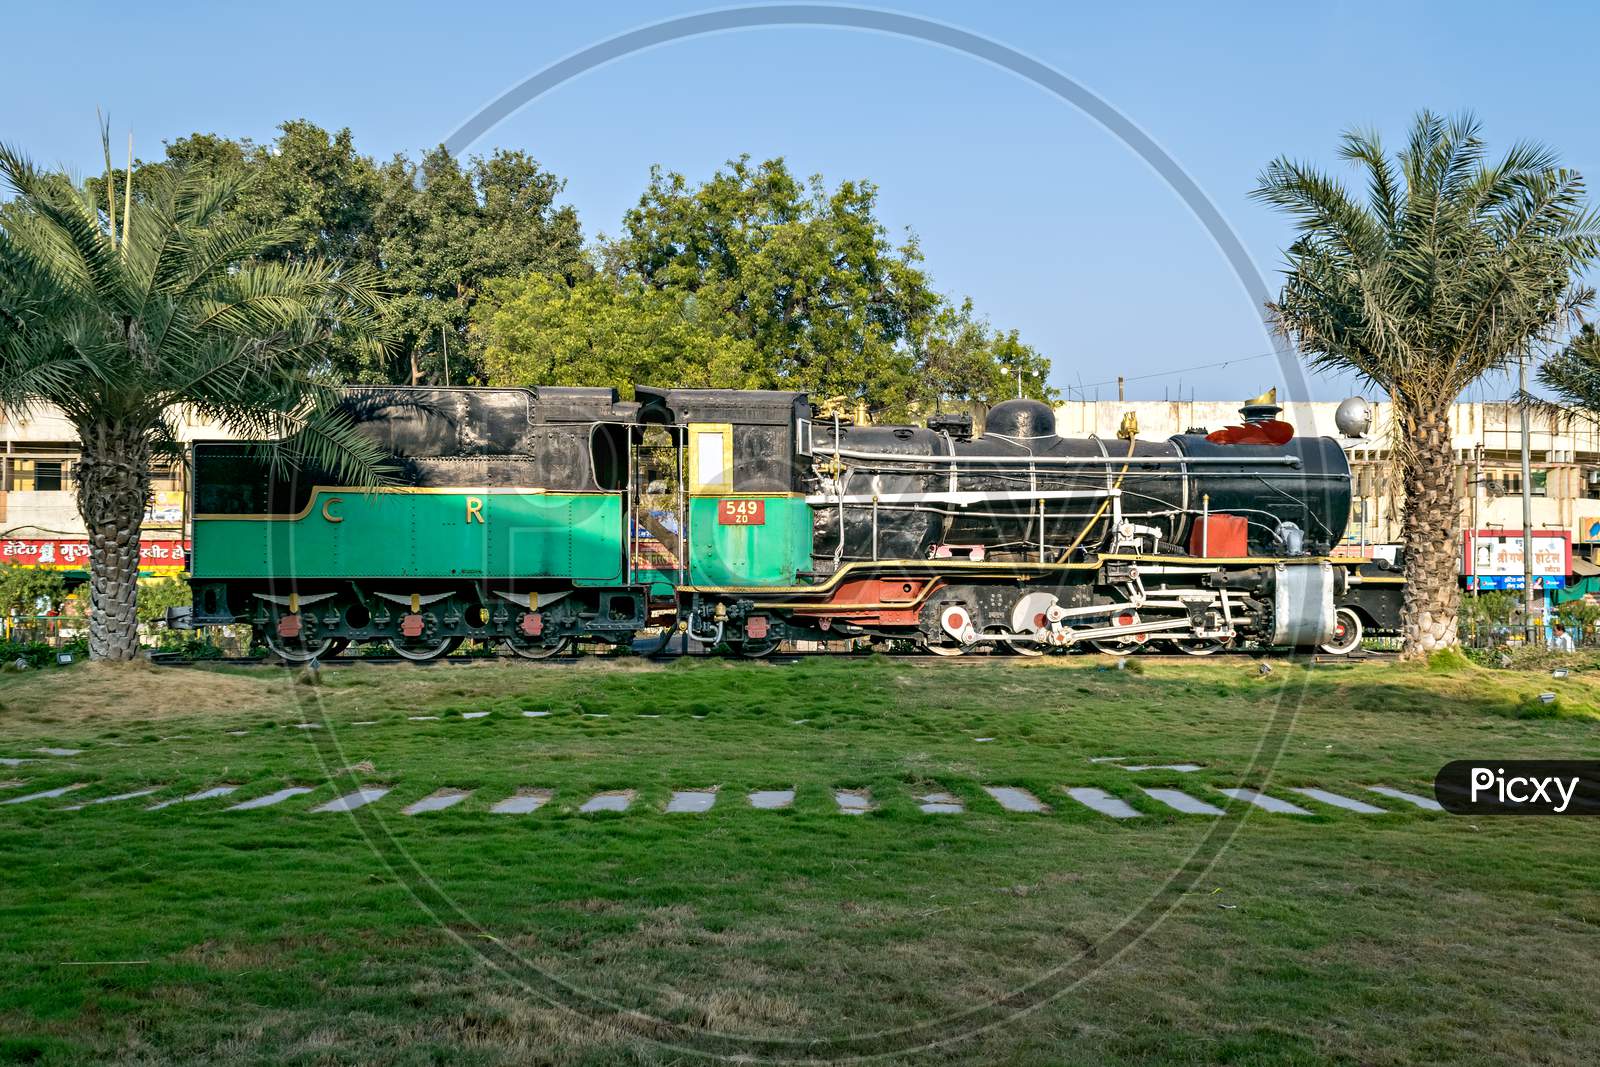 Solapur,Maharashtra,India-December 23Rd,2019: Side View Of Old Narrow Gauge Steam Locomotive, Zd-549 Preserved By Displaying In Front Of Solapur Railway Station.